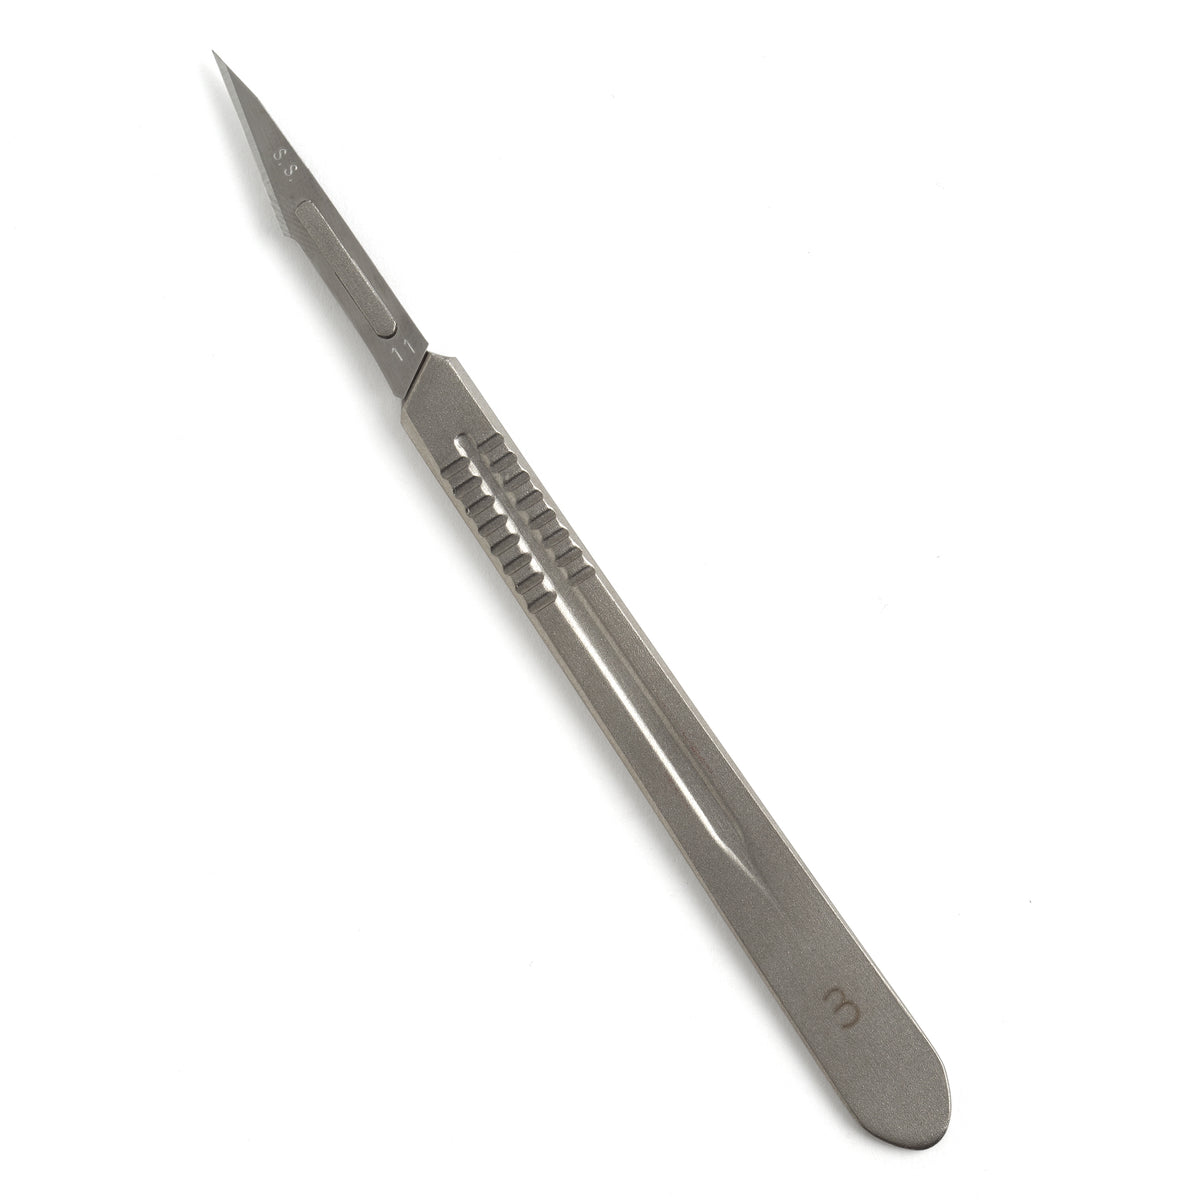 Surgical Scalpel Handle